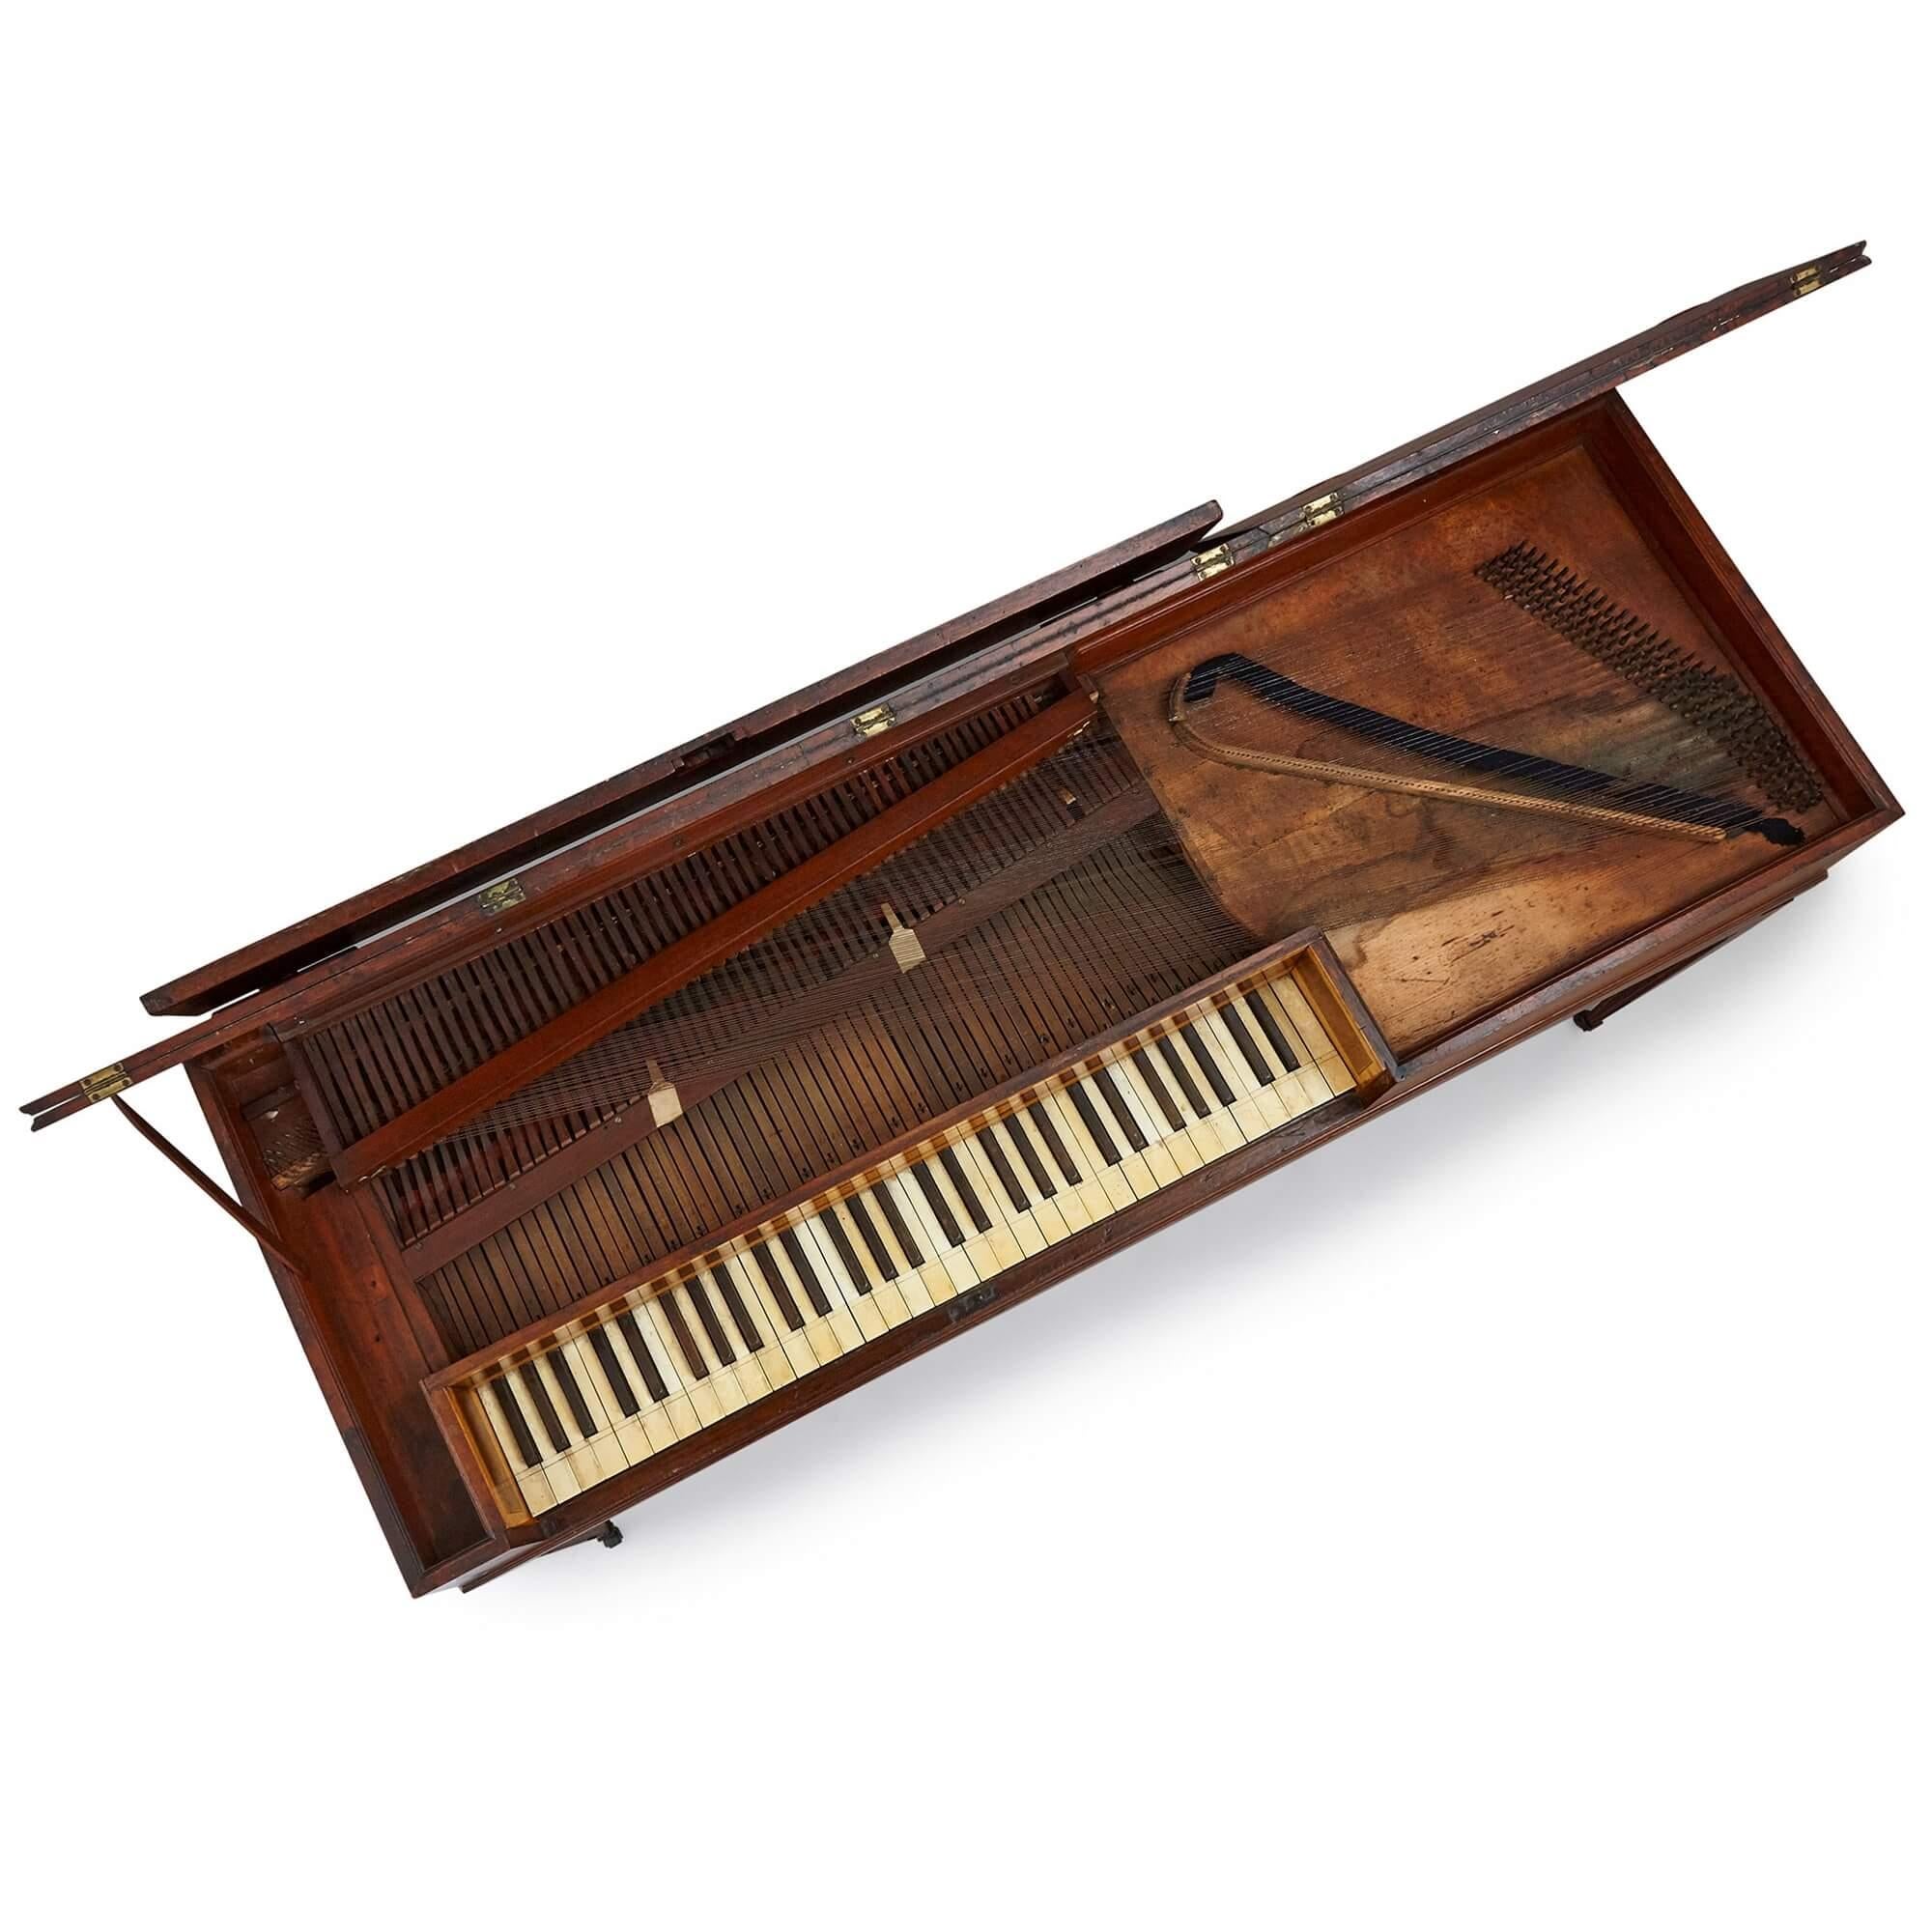 Antique George III period square piano by Beck
English, 1788
Height 81cm, width 148cm, depth 52cm

This elegant instrument is a square piano, a type popular during the eighteenth century. The piano is crafted from mahogany and is adorned with inlaid